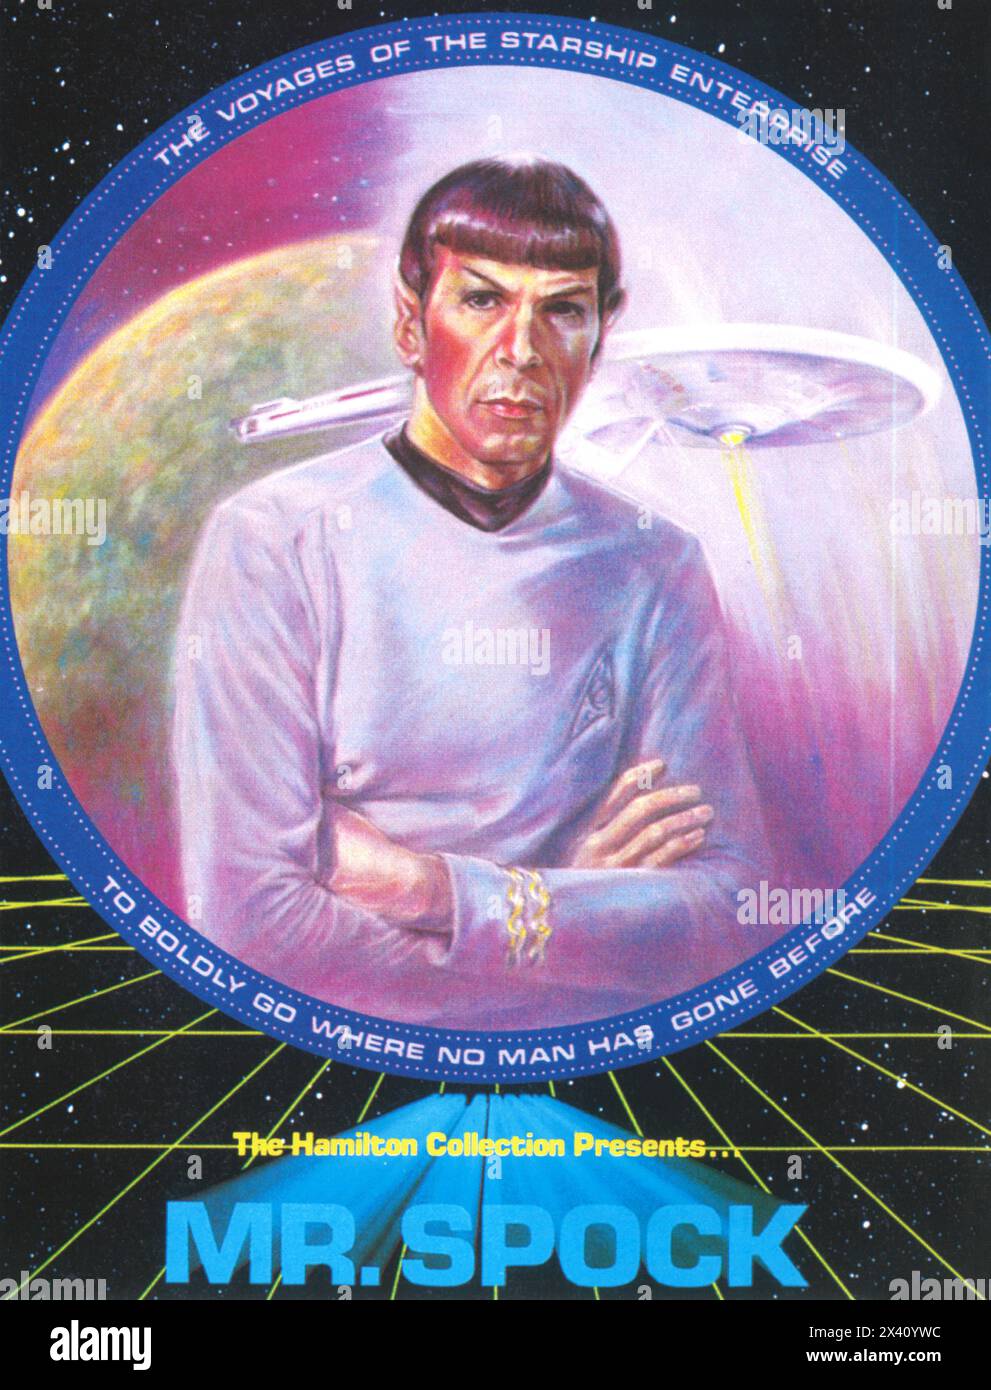 1984 The Hamilton Collection presents... Mr. Spock STAR TREK Collector Plate ad Stock Photo